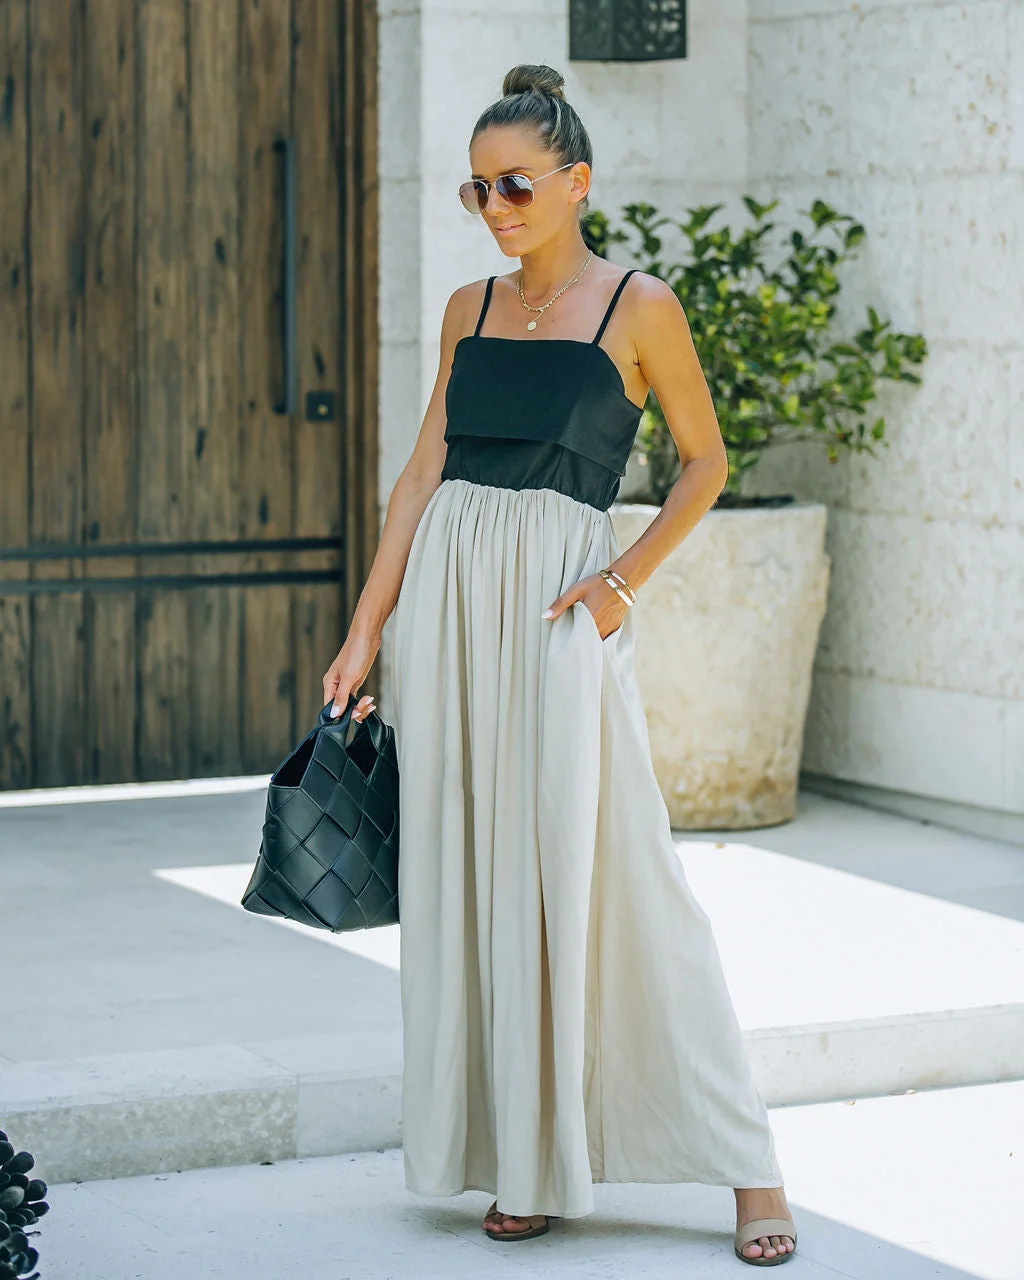 ABEBEY-Summer Vacation Beach Dress Casual Dress Ins Style Photograph Dress Marcellus Pocketed Colorblock Maxi Dress - Black Nude